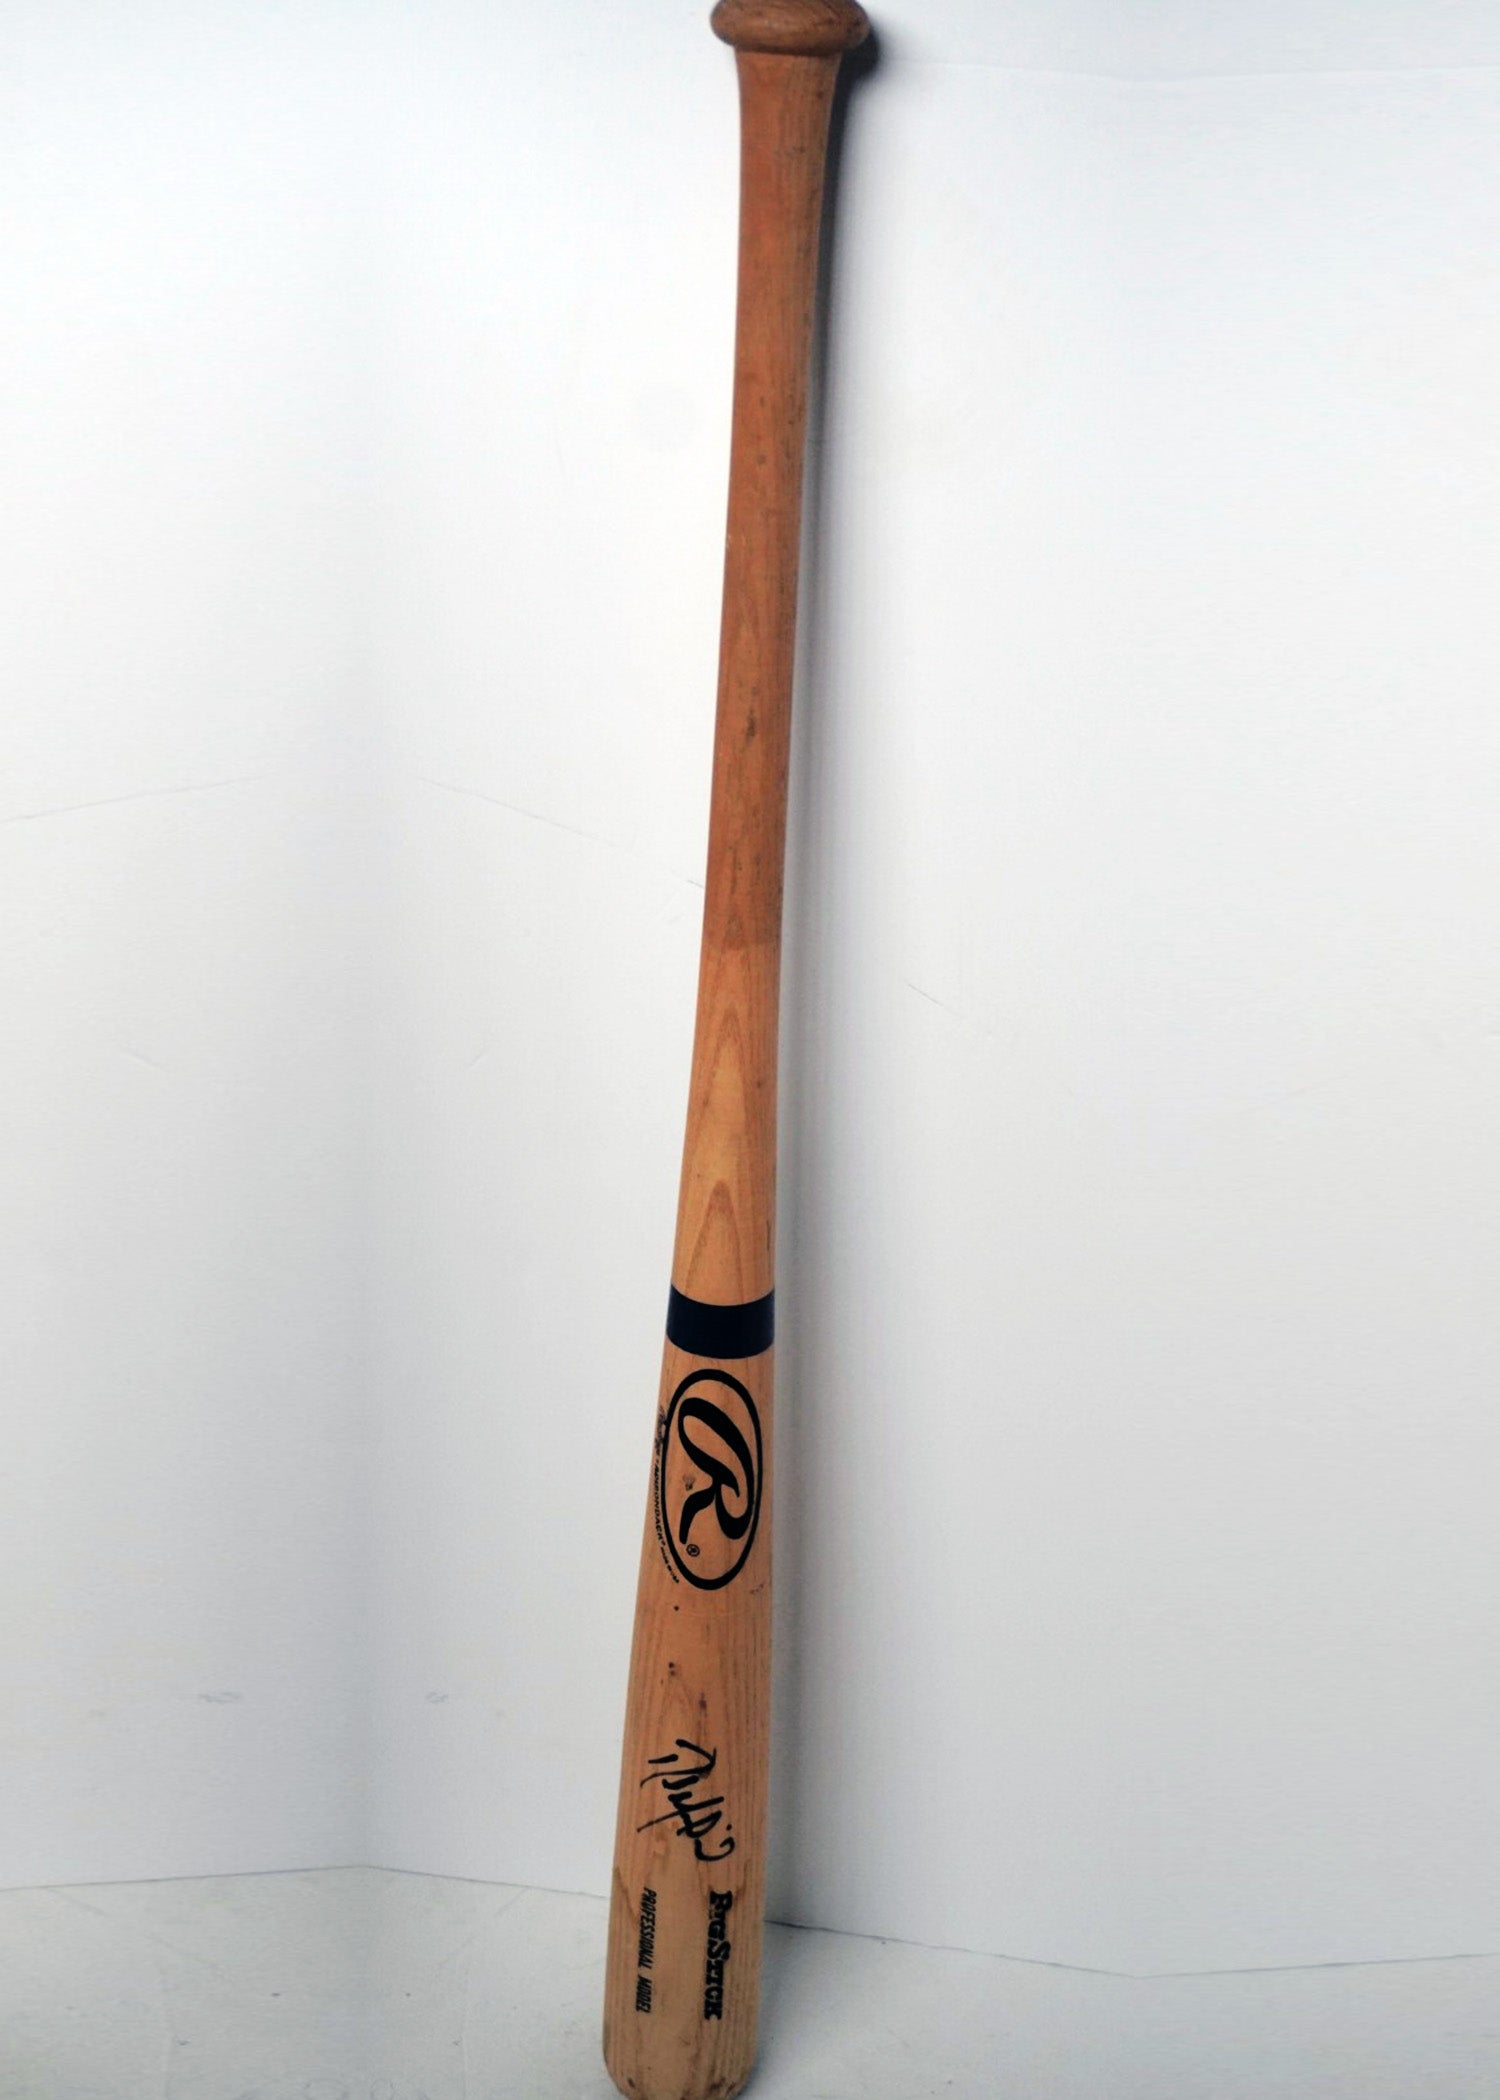 Raul Mondesi Los Angeles Dodgers bat signed with proof